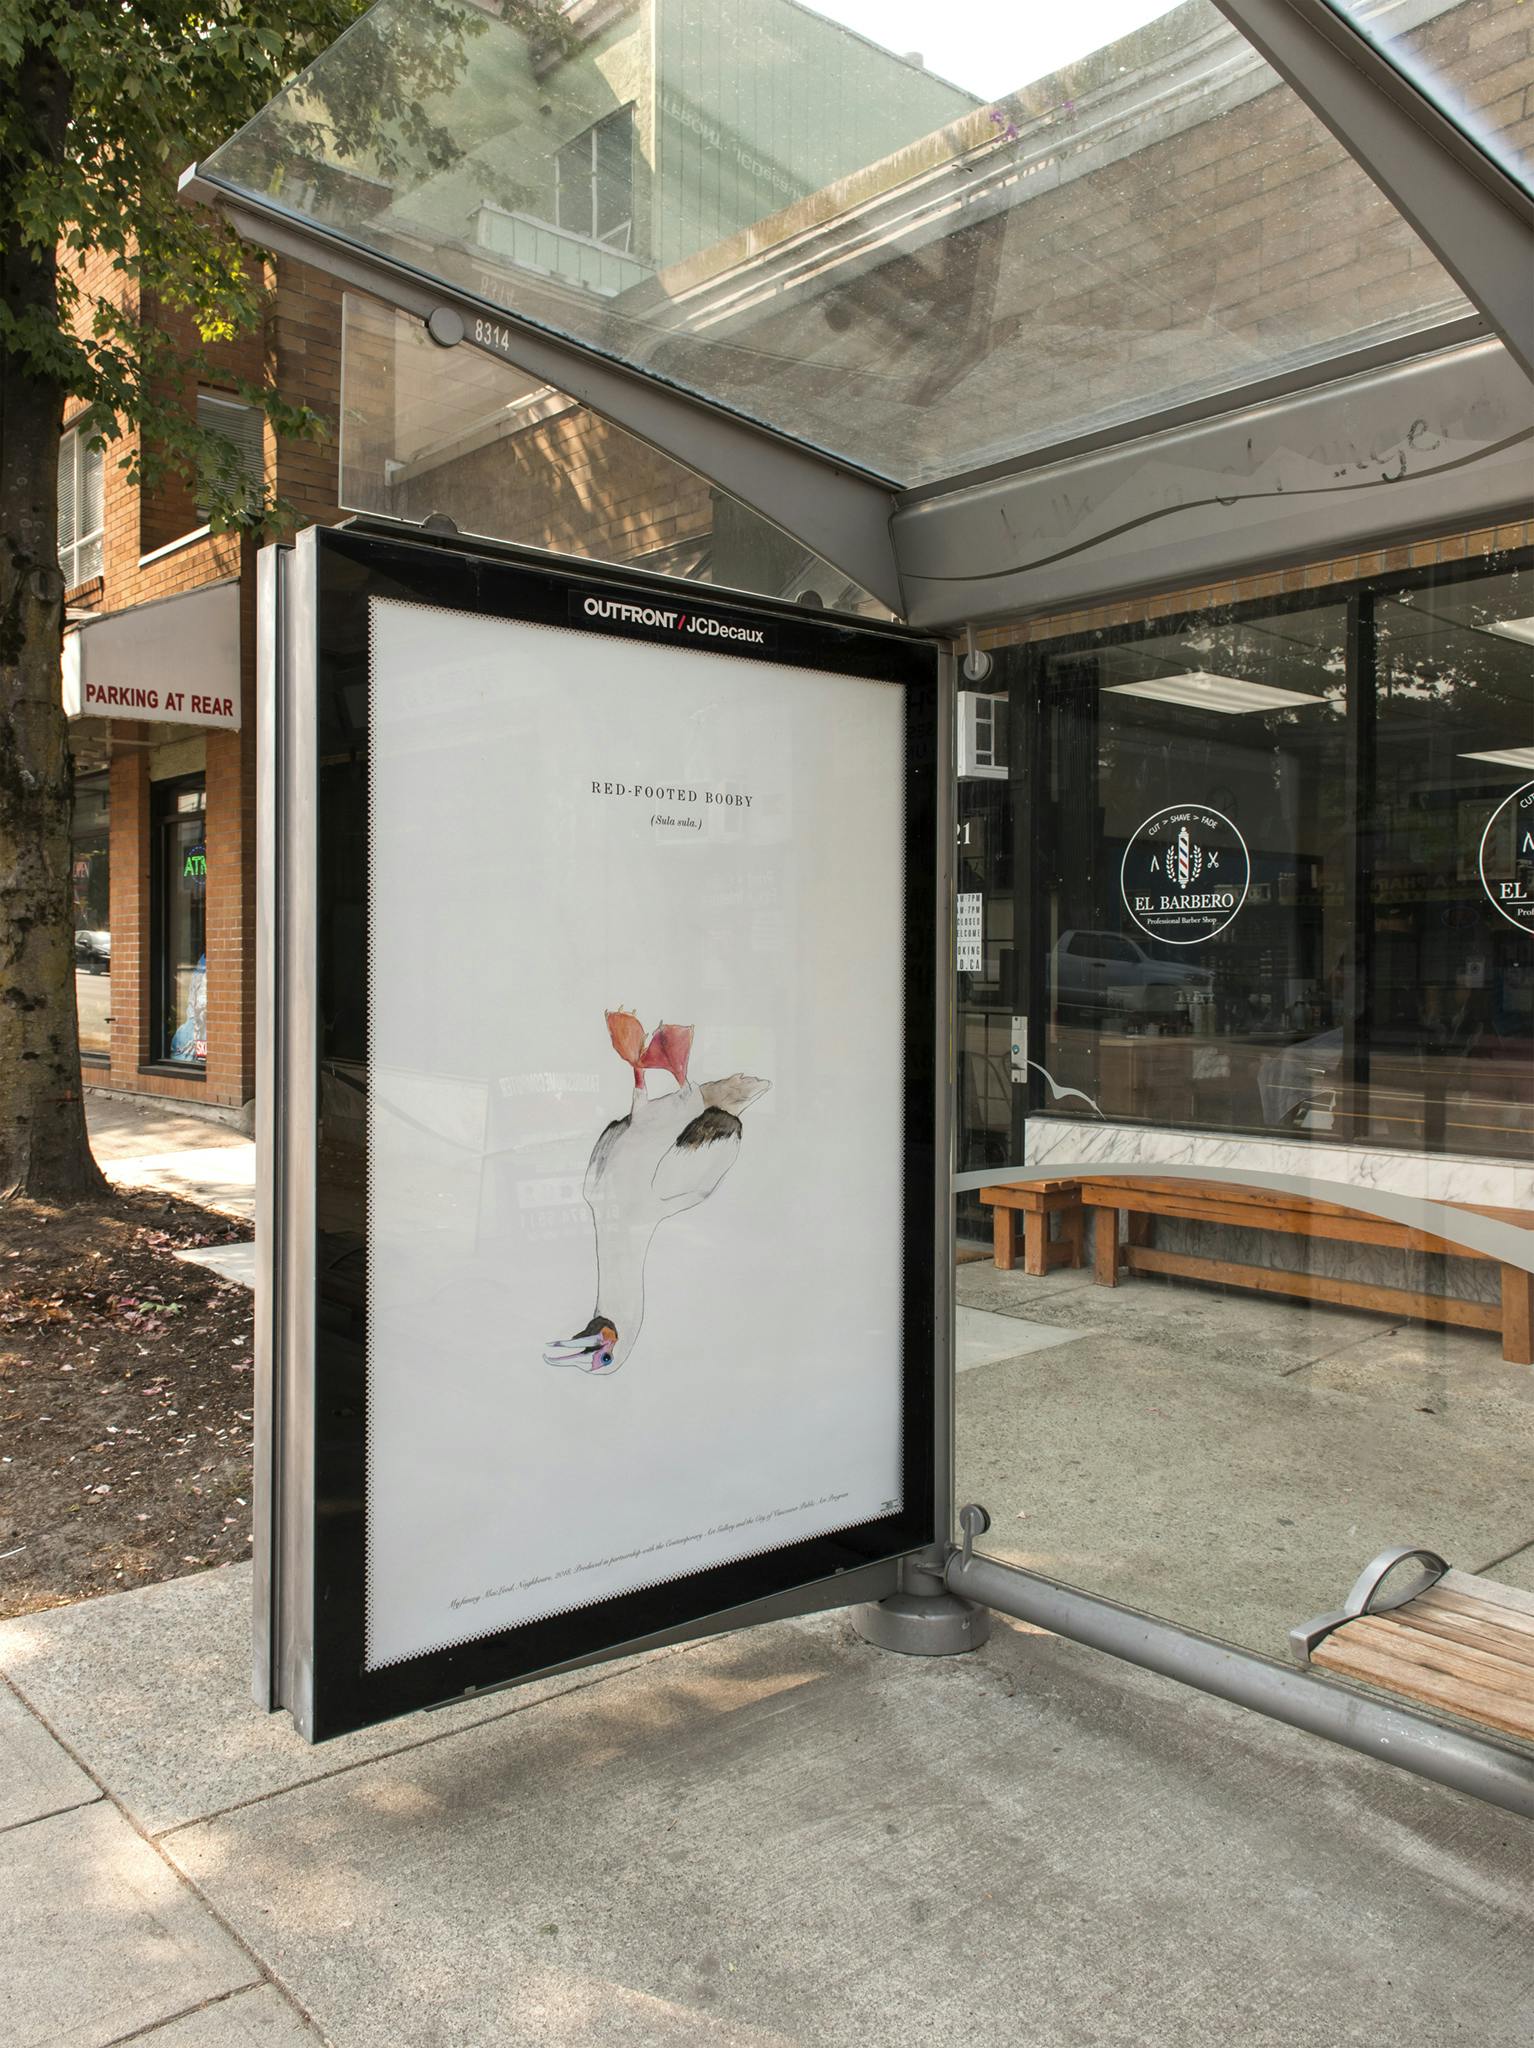 An image of a bus shelter with a large-scale watercolour print of a Red Footed Booby. The print is installed where an advertisement would normally be displayed.